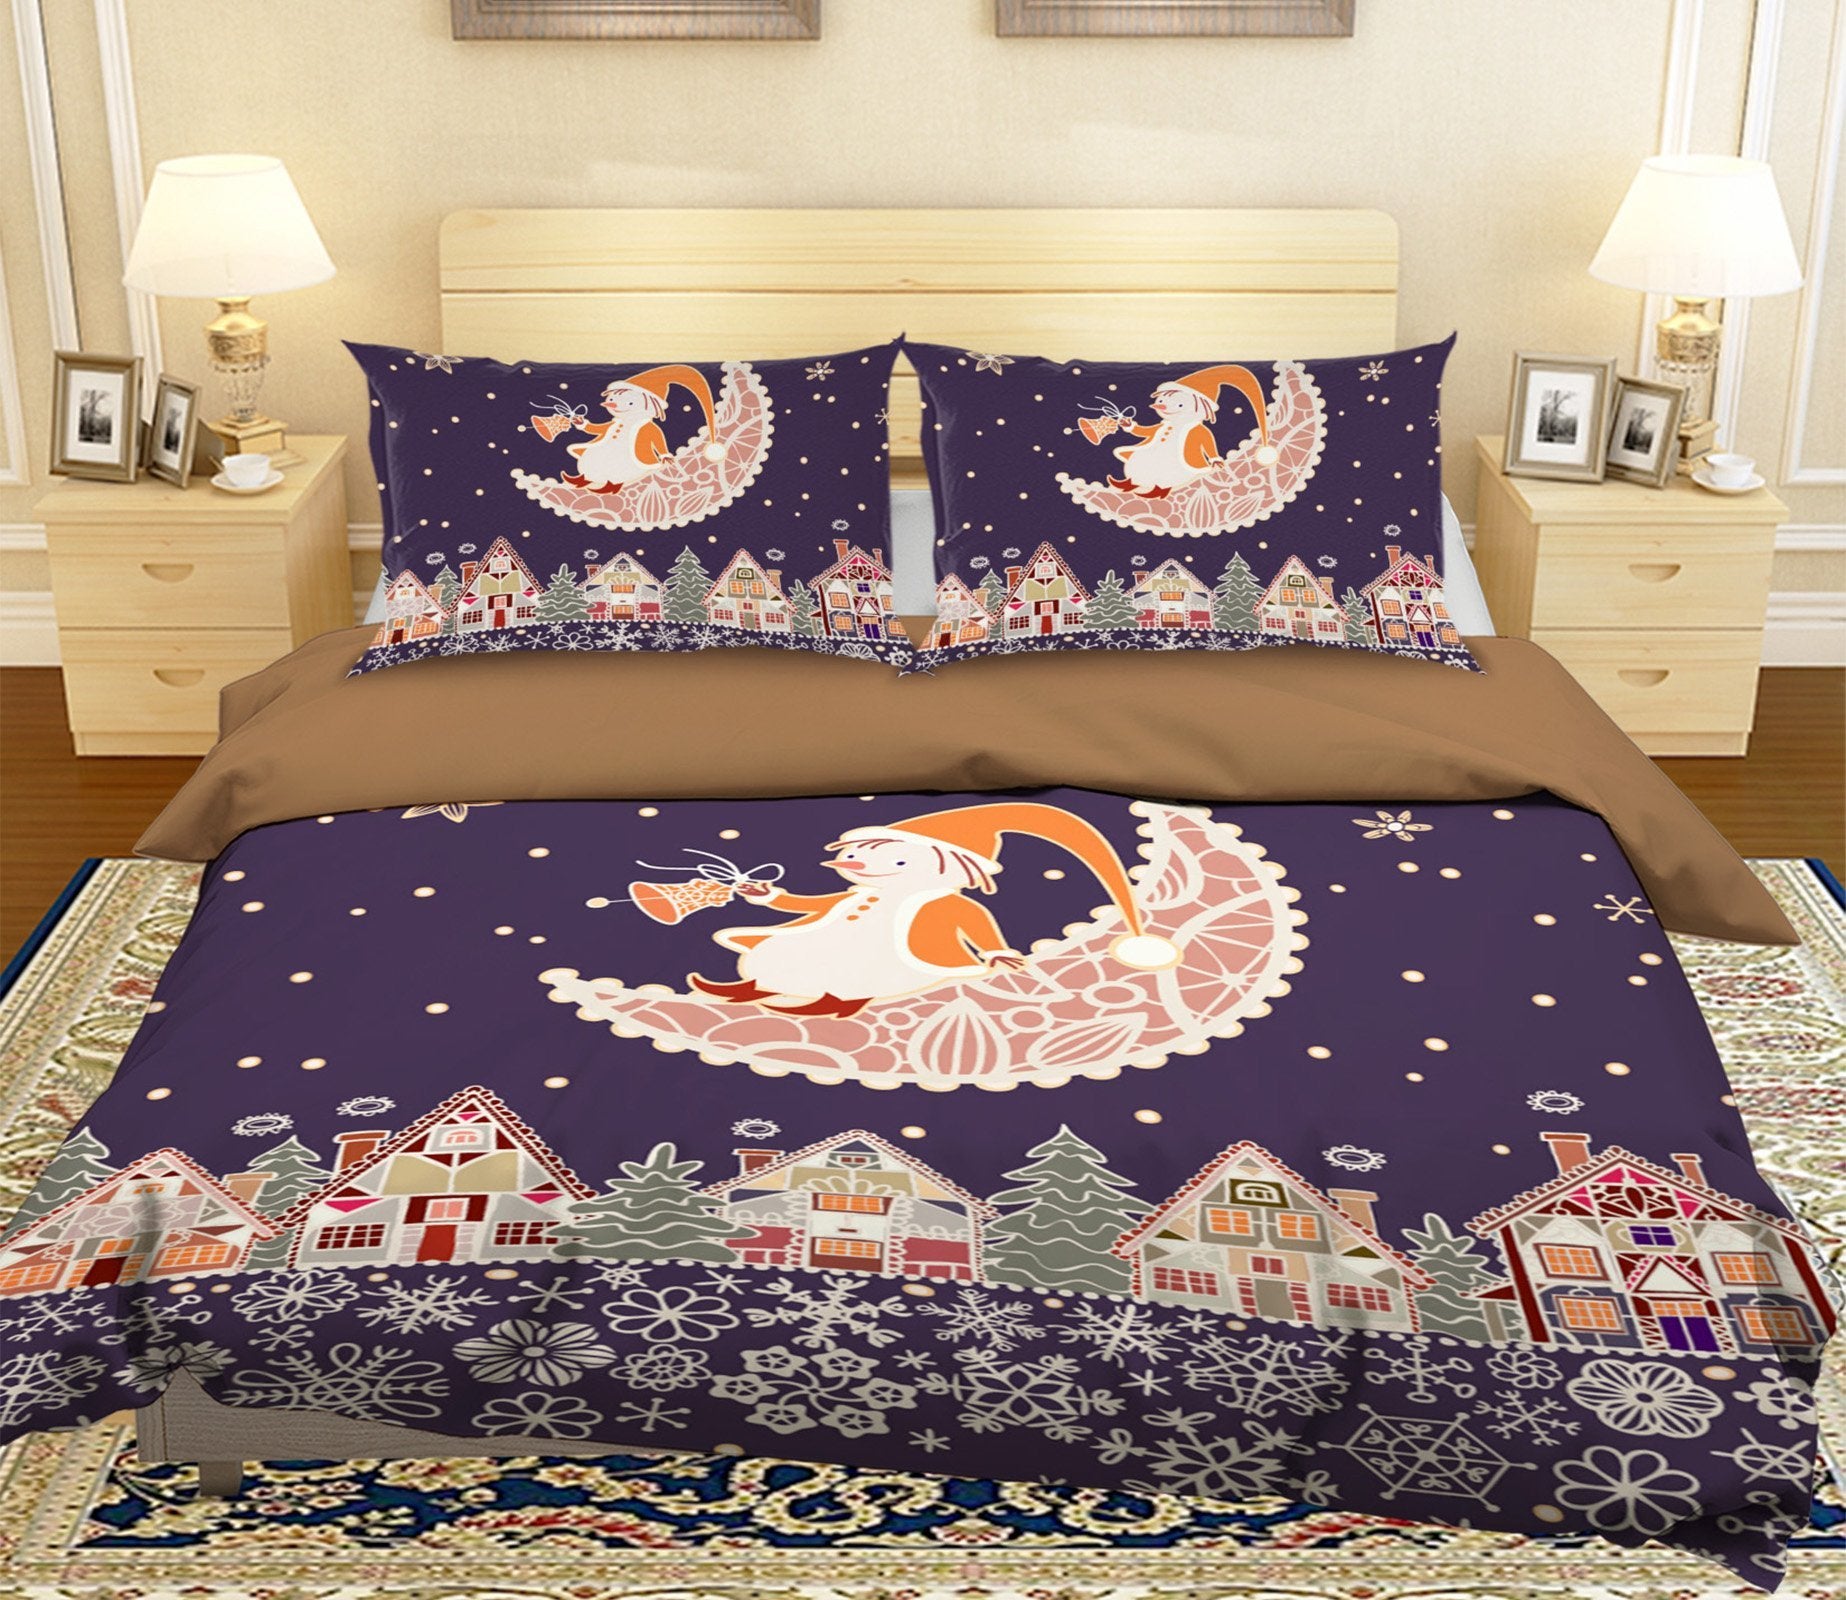 3D Christmas Lace Moon 39 Bed Pillowcases Quilt Quiet Covers AJ Creativity Home 